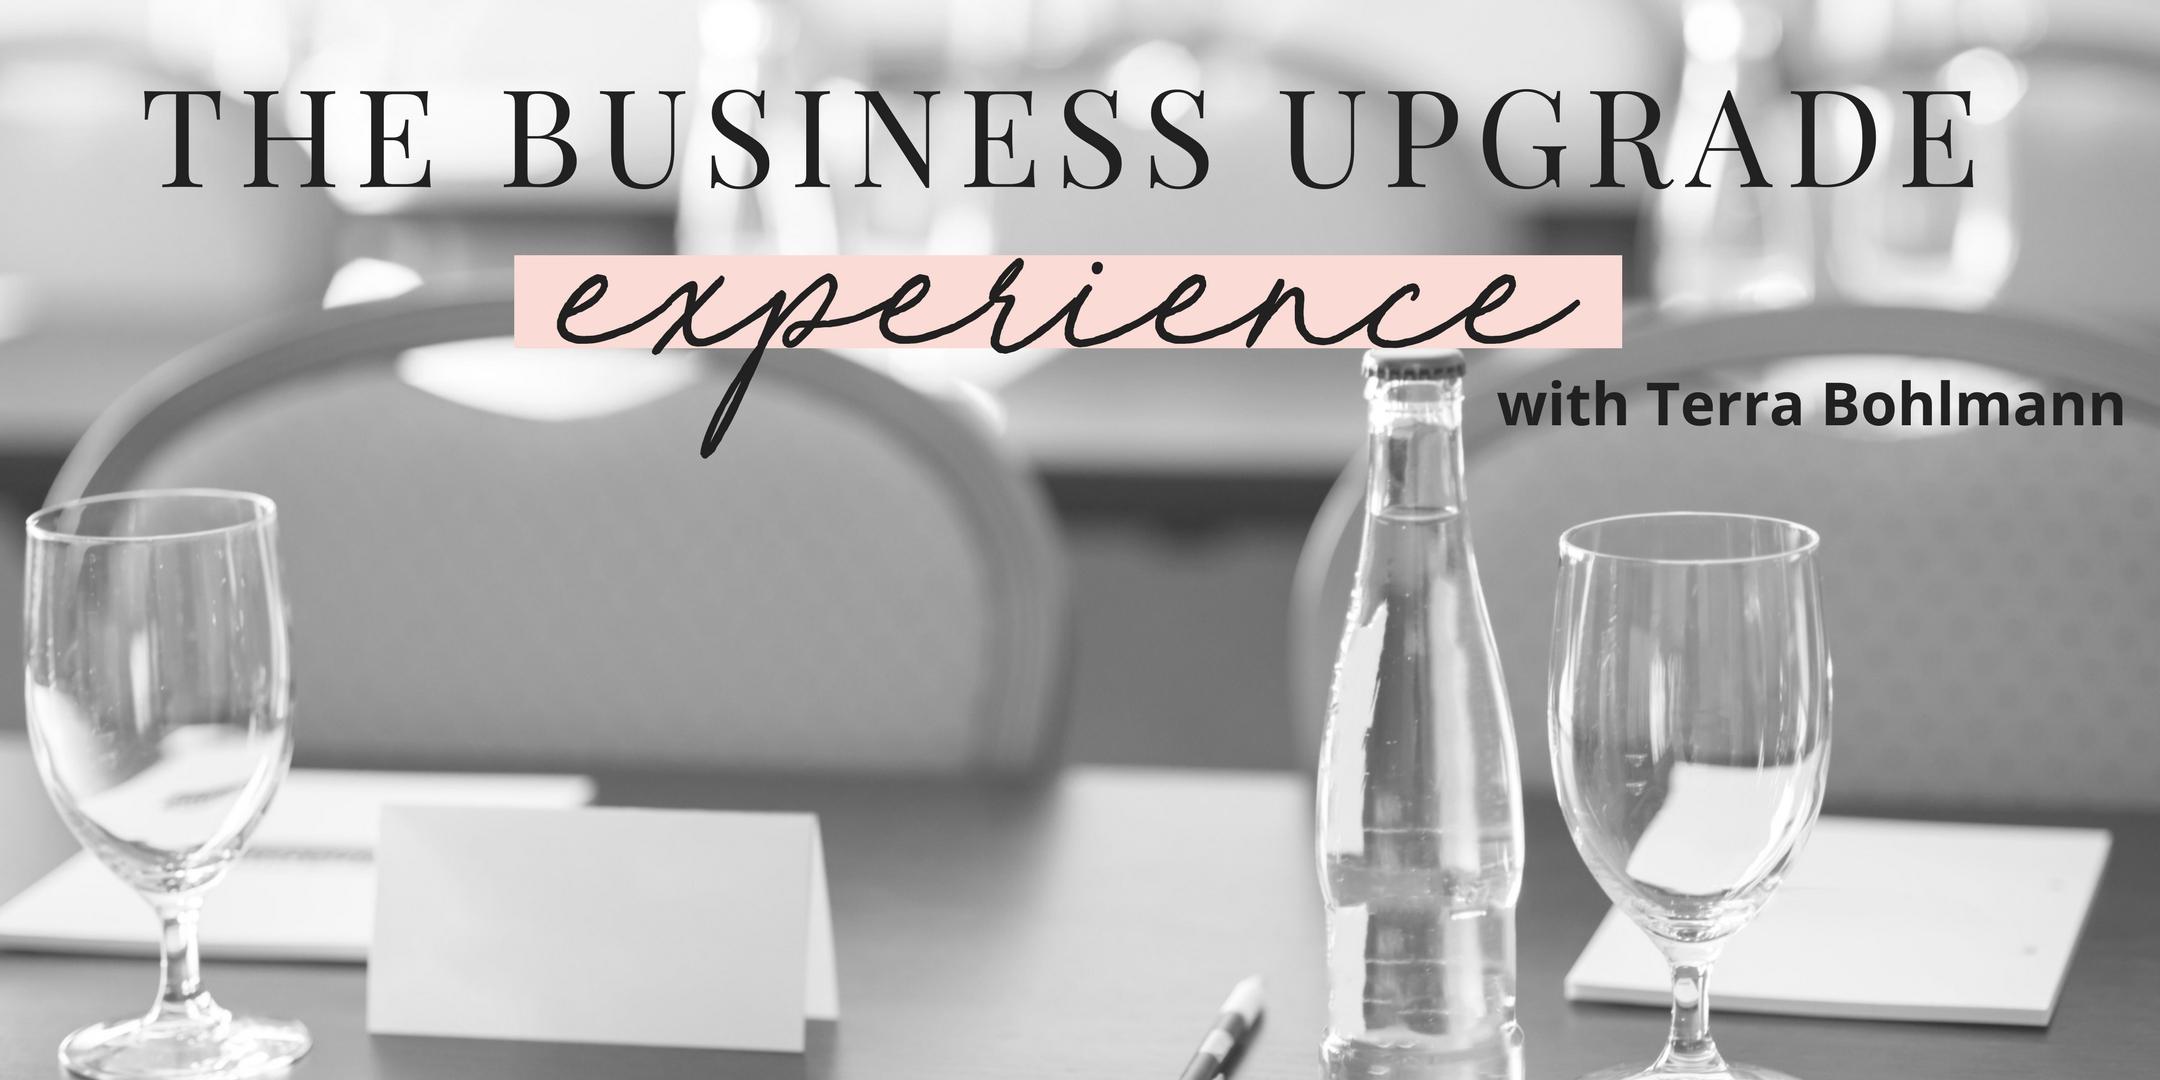 The Business Upgrade Experience with Terra Bohlmann